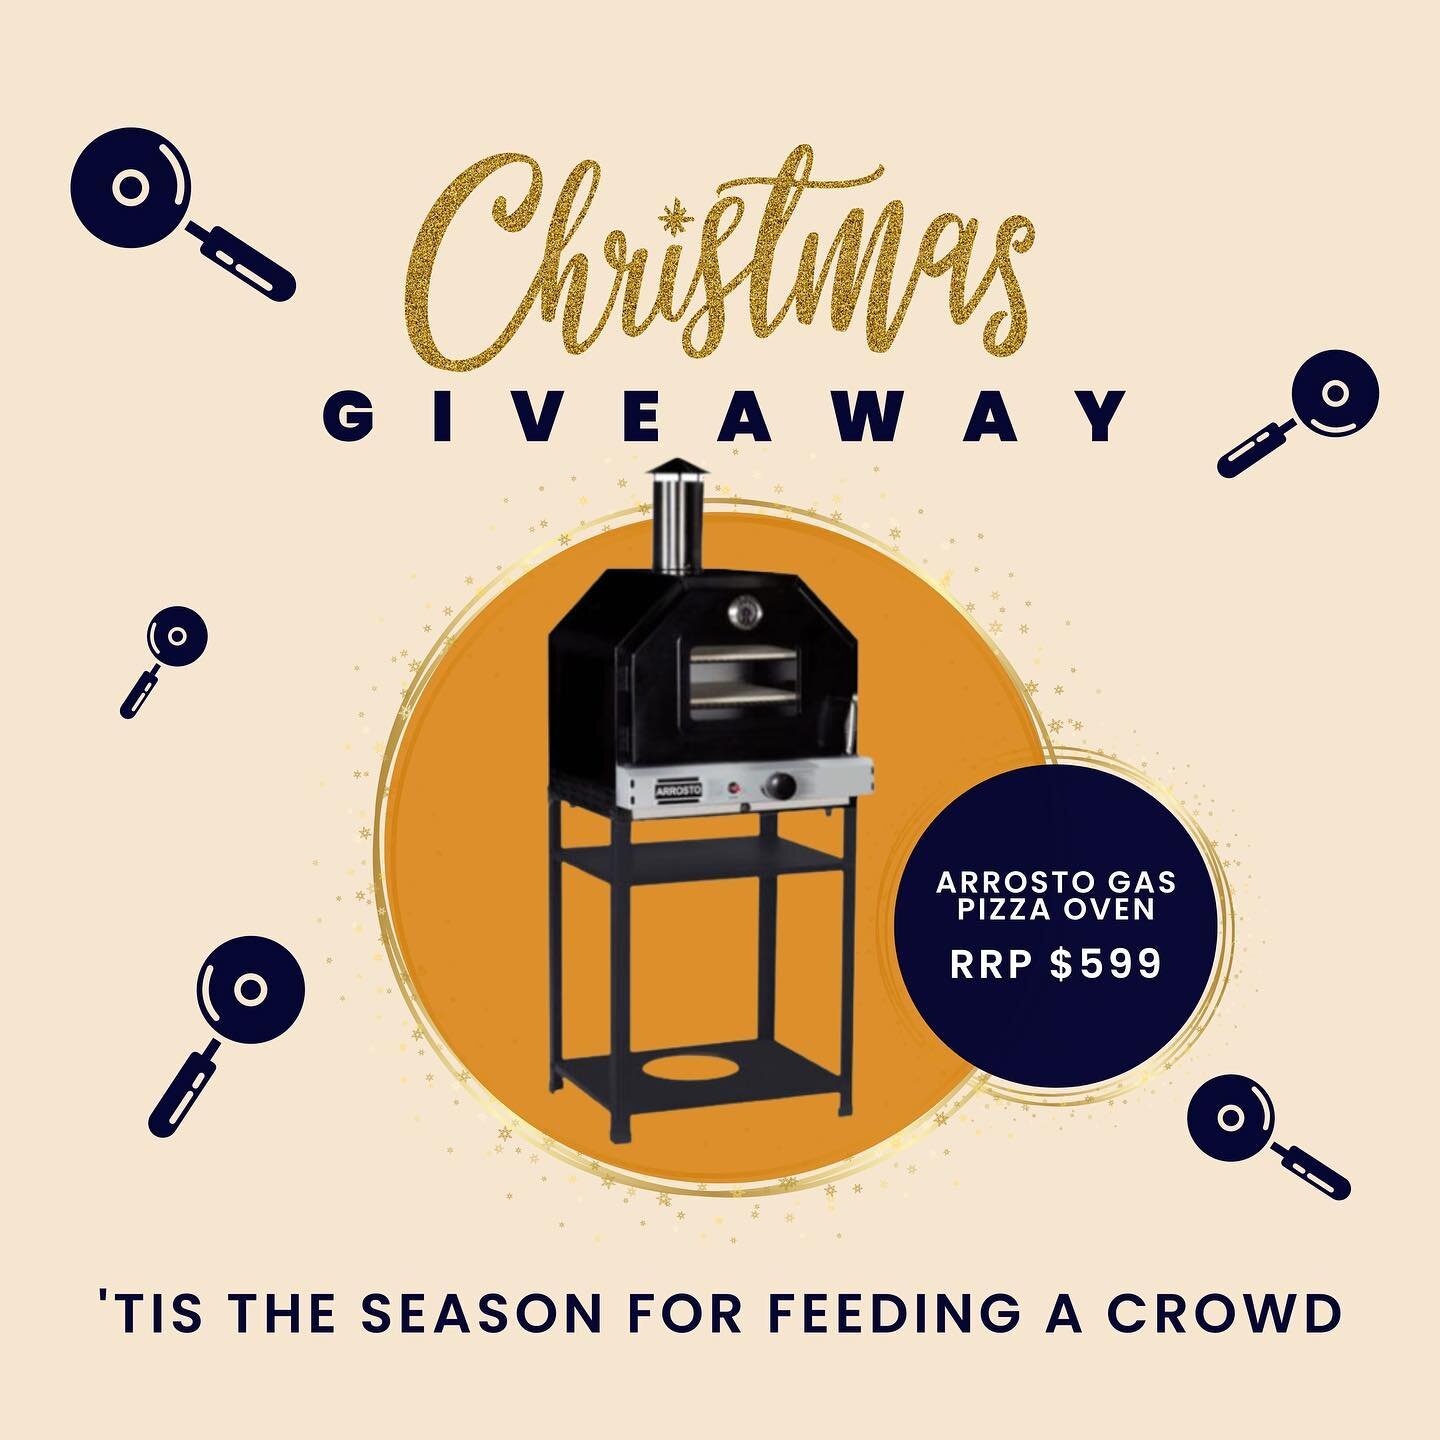 ⭐️CHRISTMAS GIVEAWAY ⭐️

This is not a drill! As generous as jolly ol Saint Nick himself, we're giving away a top-of-the-range Arrosto Gas Pizza Oven, valued at $599!! 🙀

🍕Gas powered
🍕A viewing window to watch your pizzas cooking
🍕2x premium piz